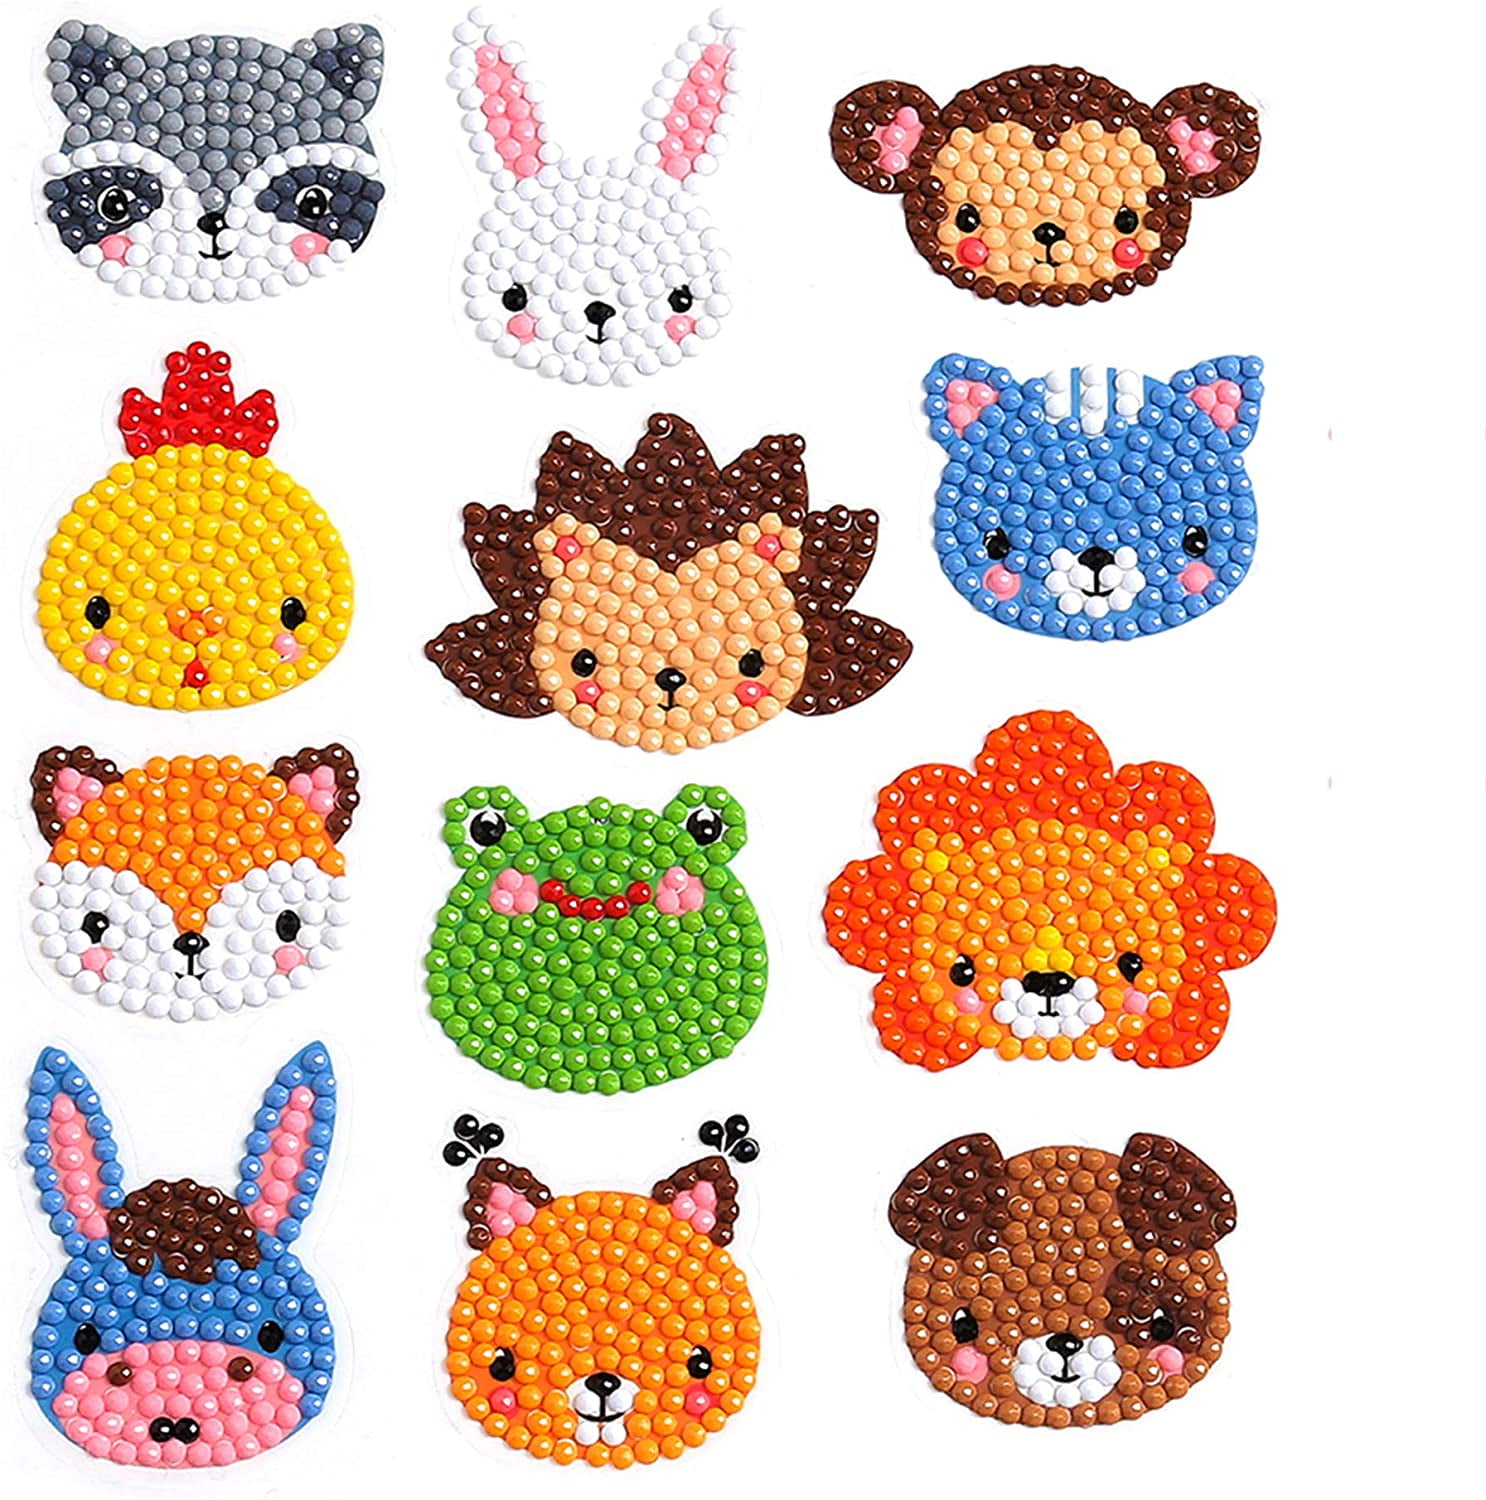 Dropship 5D Diamond Painting Stickers Kits For Kids Arts And Crafts,  Cartoon Stickers Stick Paint With Diamonds By Numbers, 15Pcs Cute Garden  Animals Series, Easy To DIY to Sell Online at a